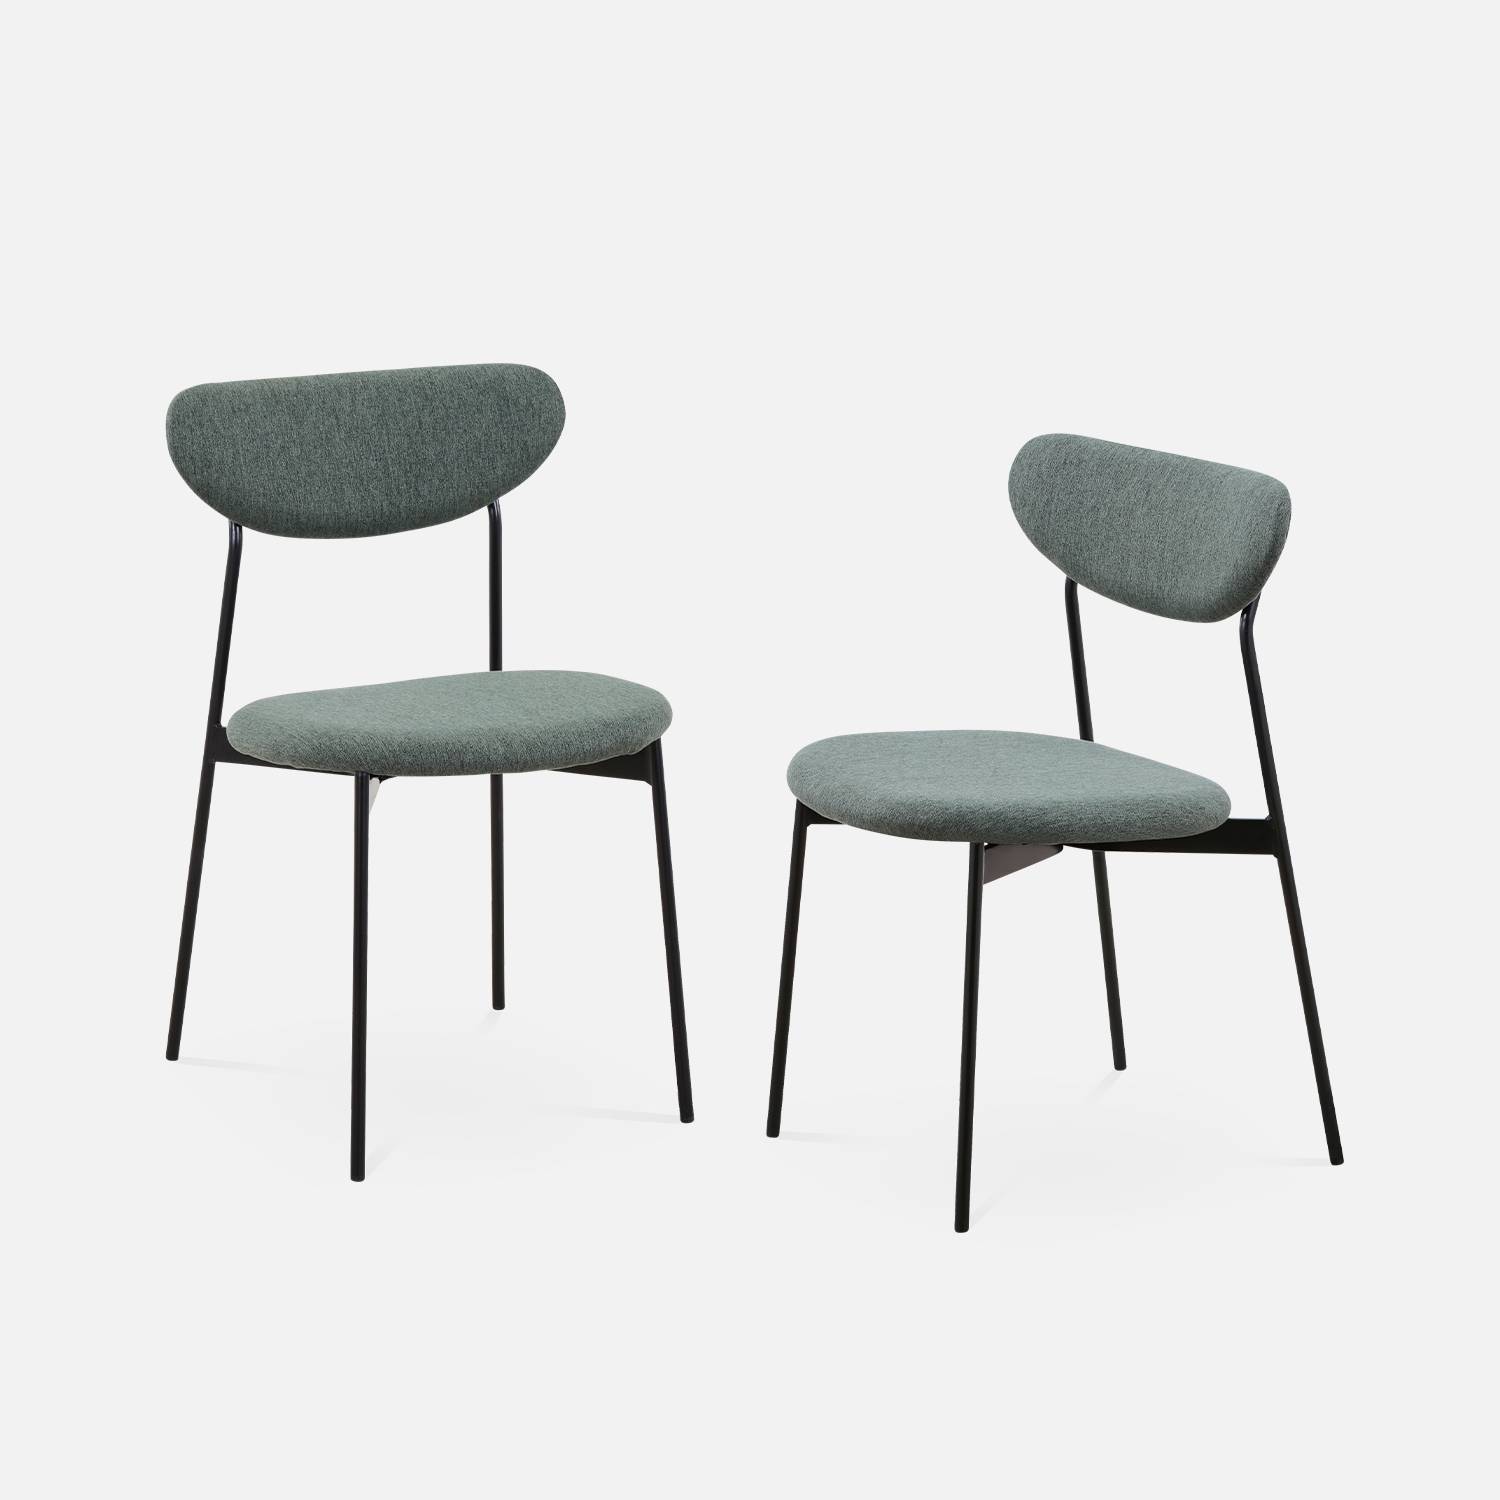 Set of 2 retro style dining chairs with steel legs, Green | sweeek